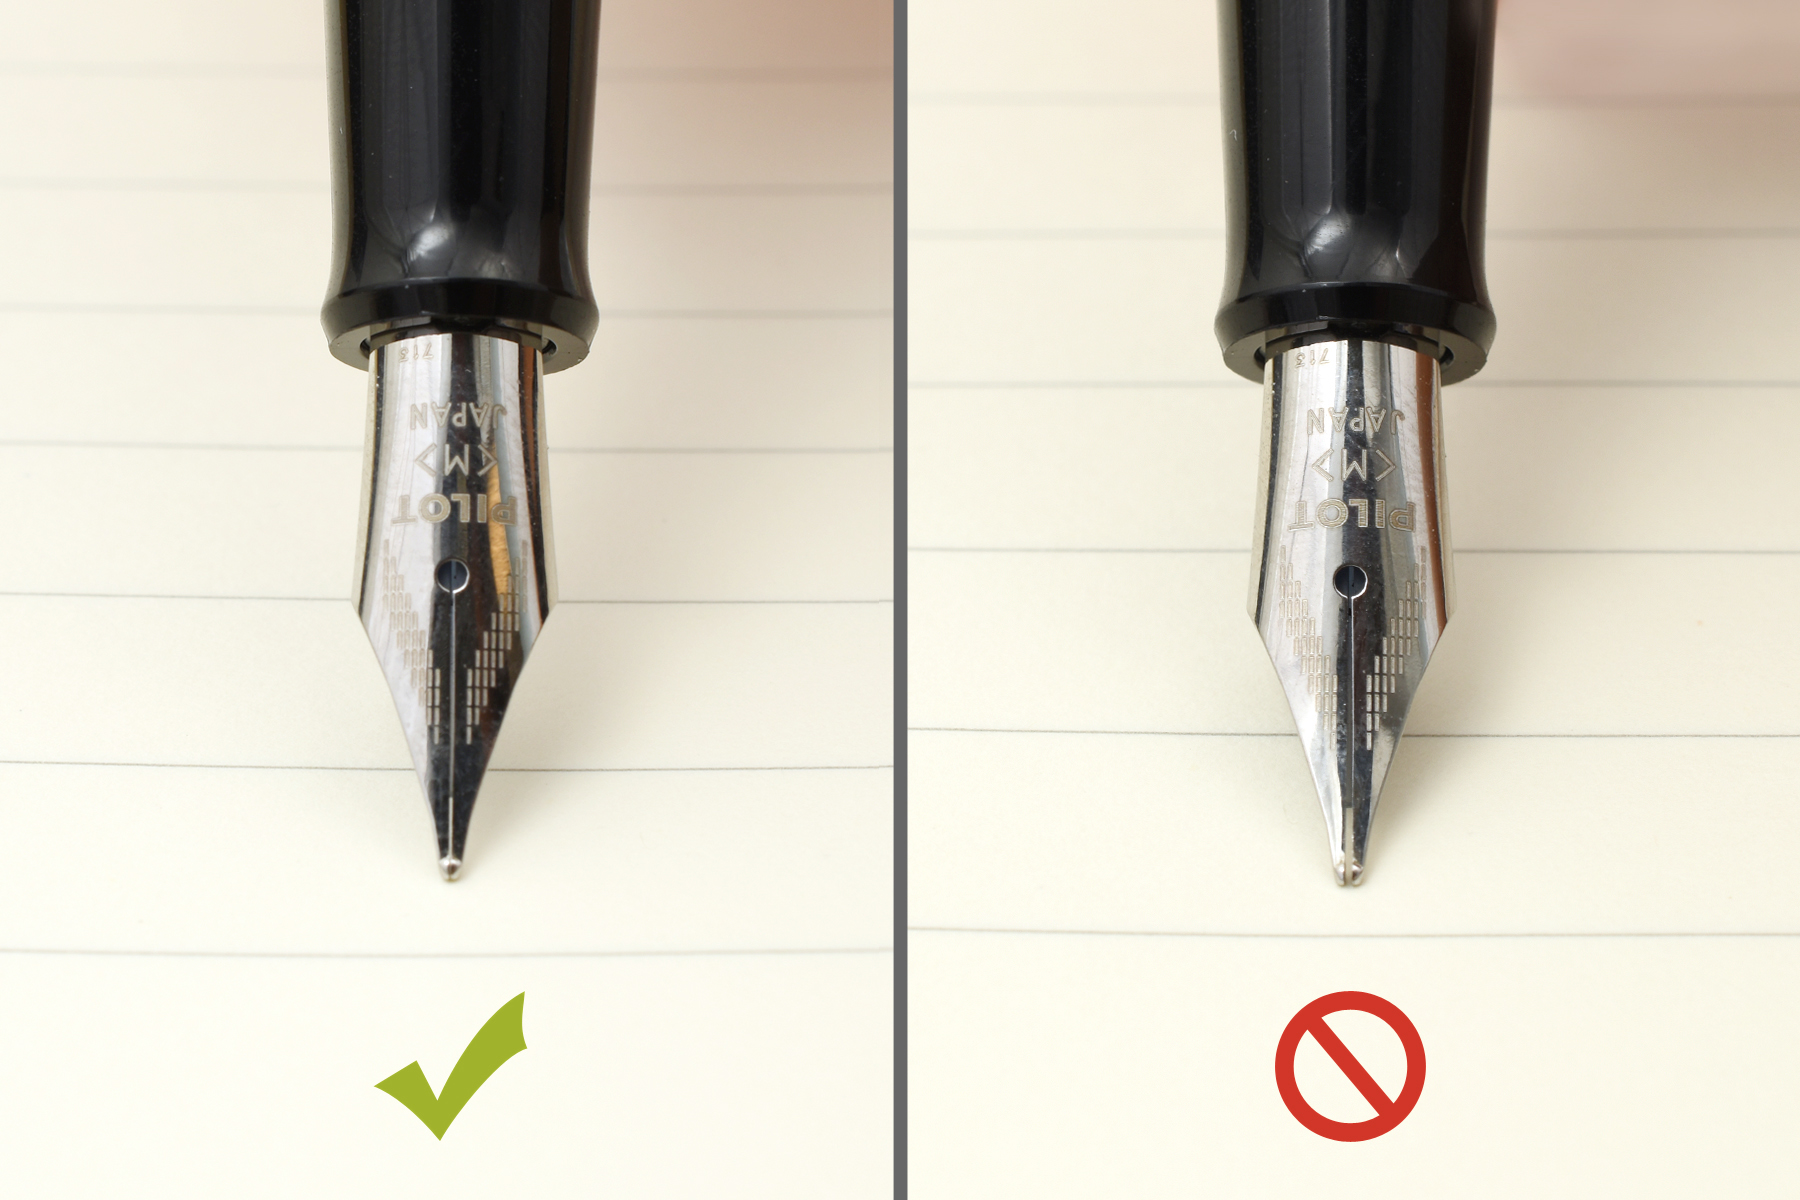 With fountain pens, you only need just enough pressure to make sure the nib stays in contact with the paper.